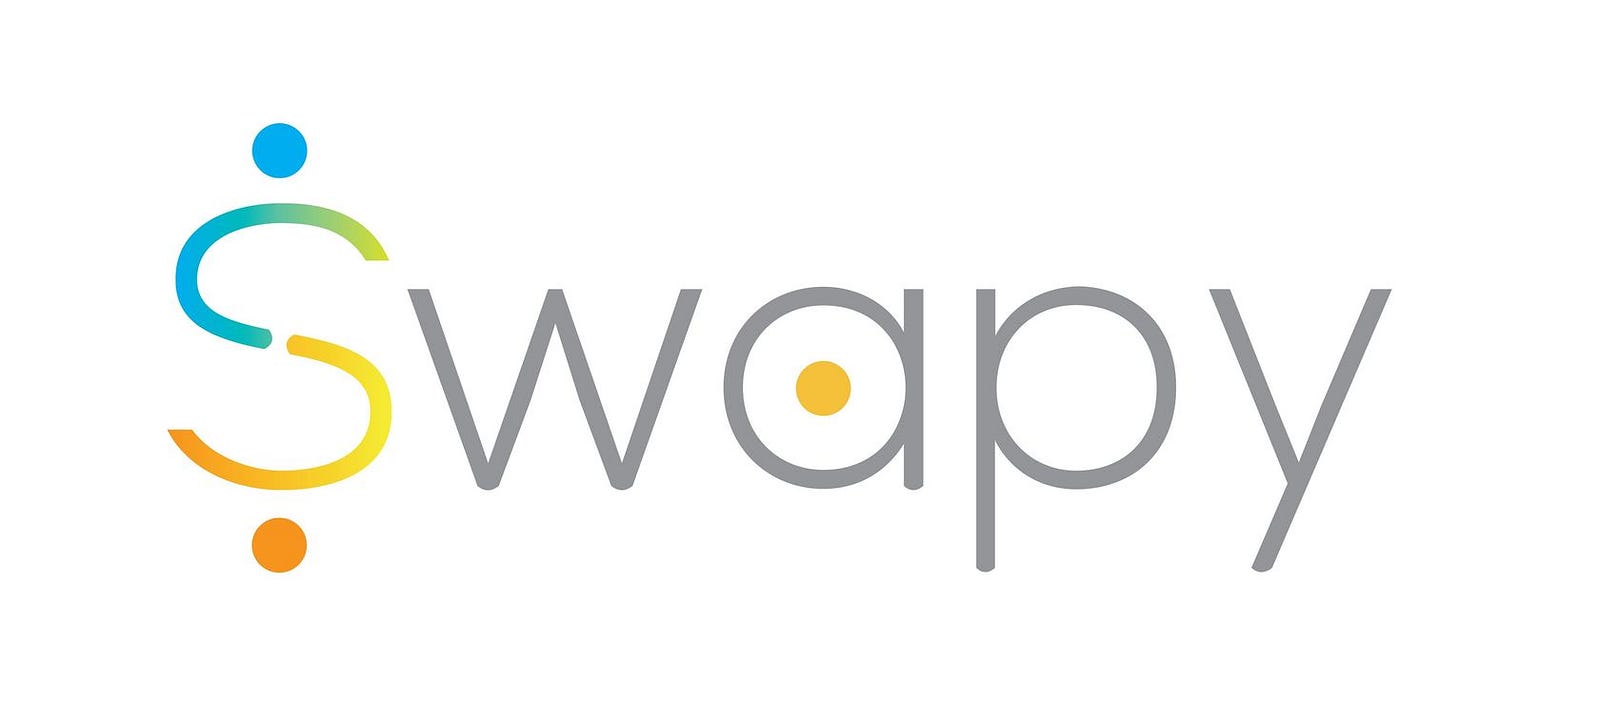 Image result for swapy ico